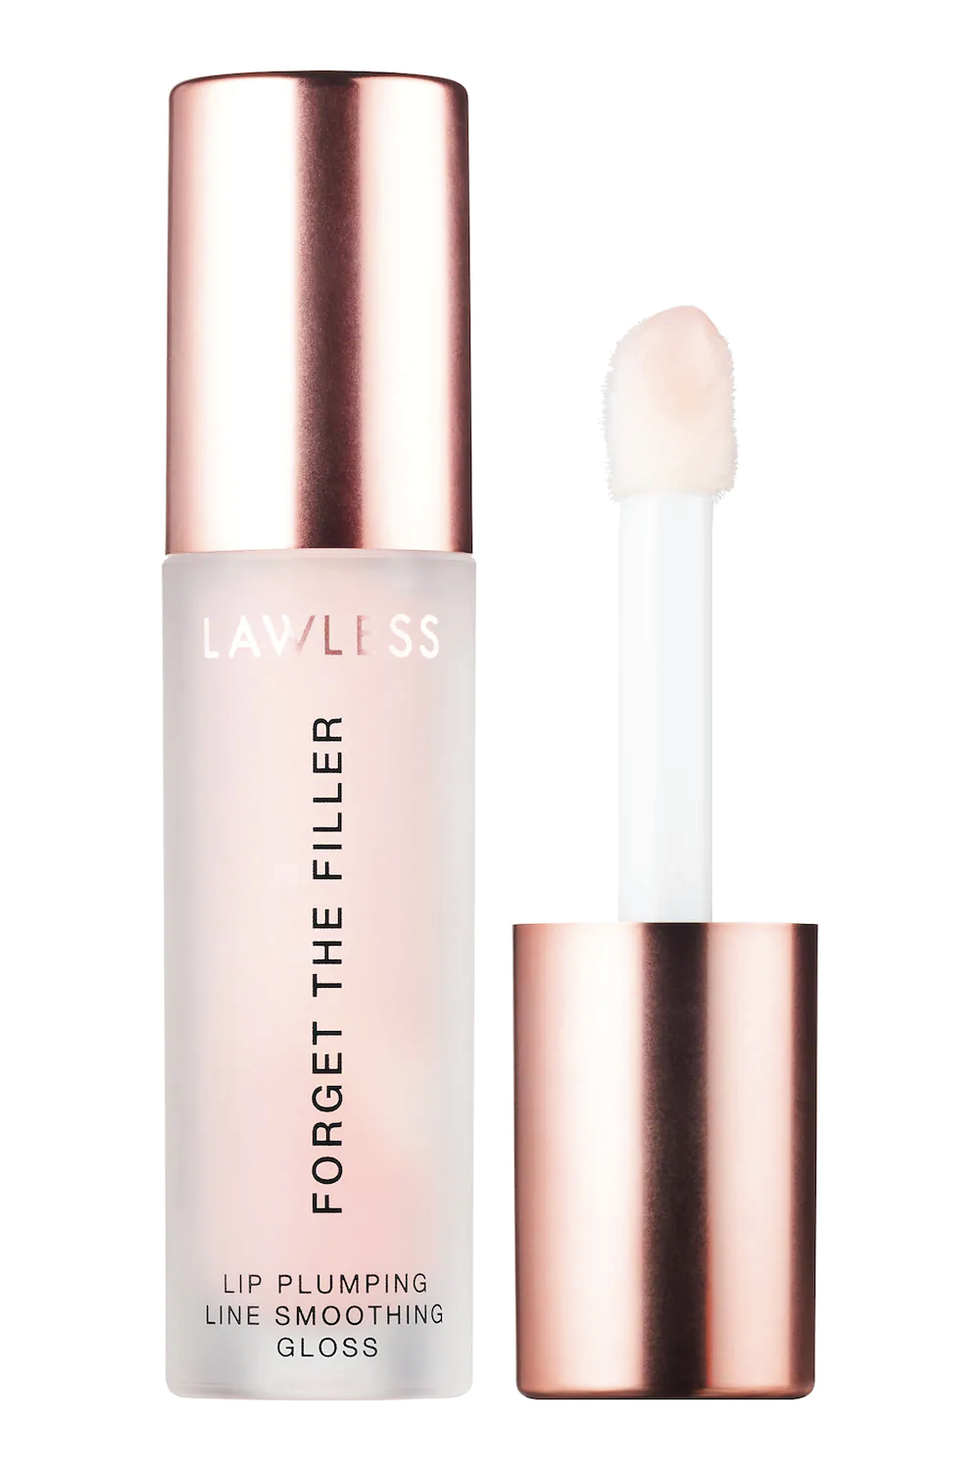 How Lawless Beauty's Forget The Filler Lip Plumping Line Smoothing